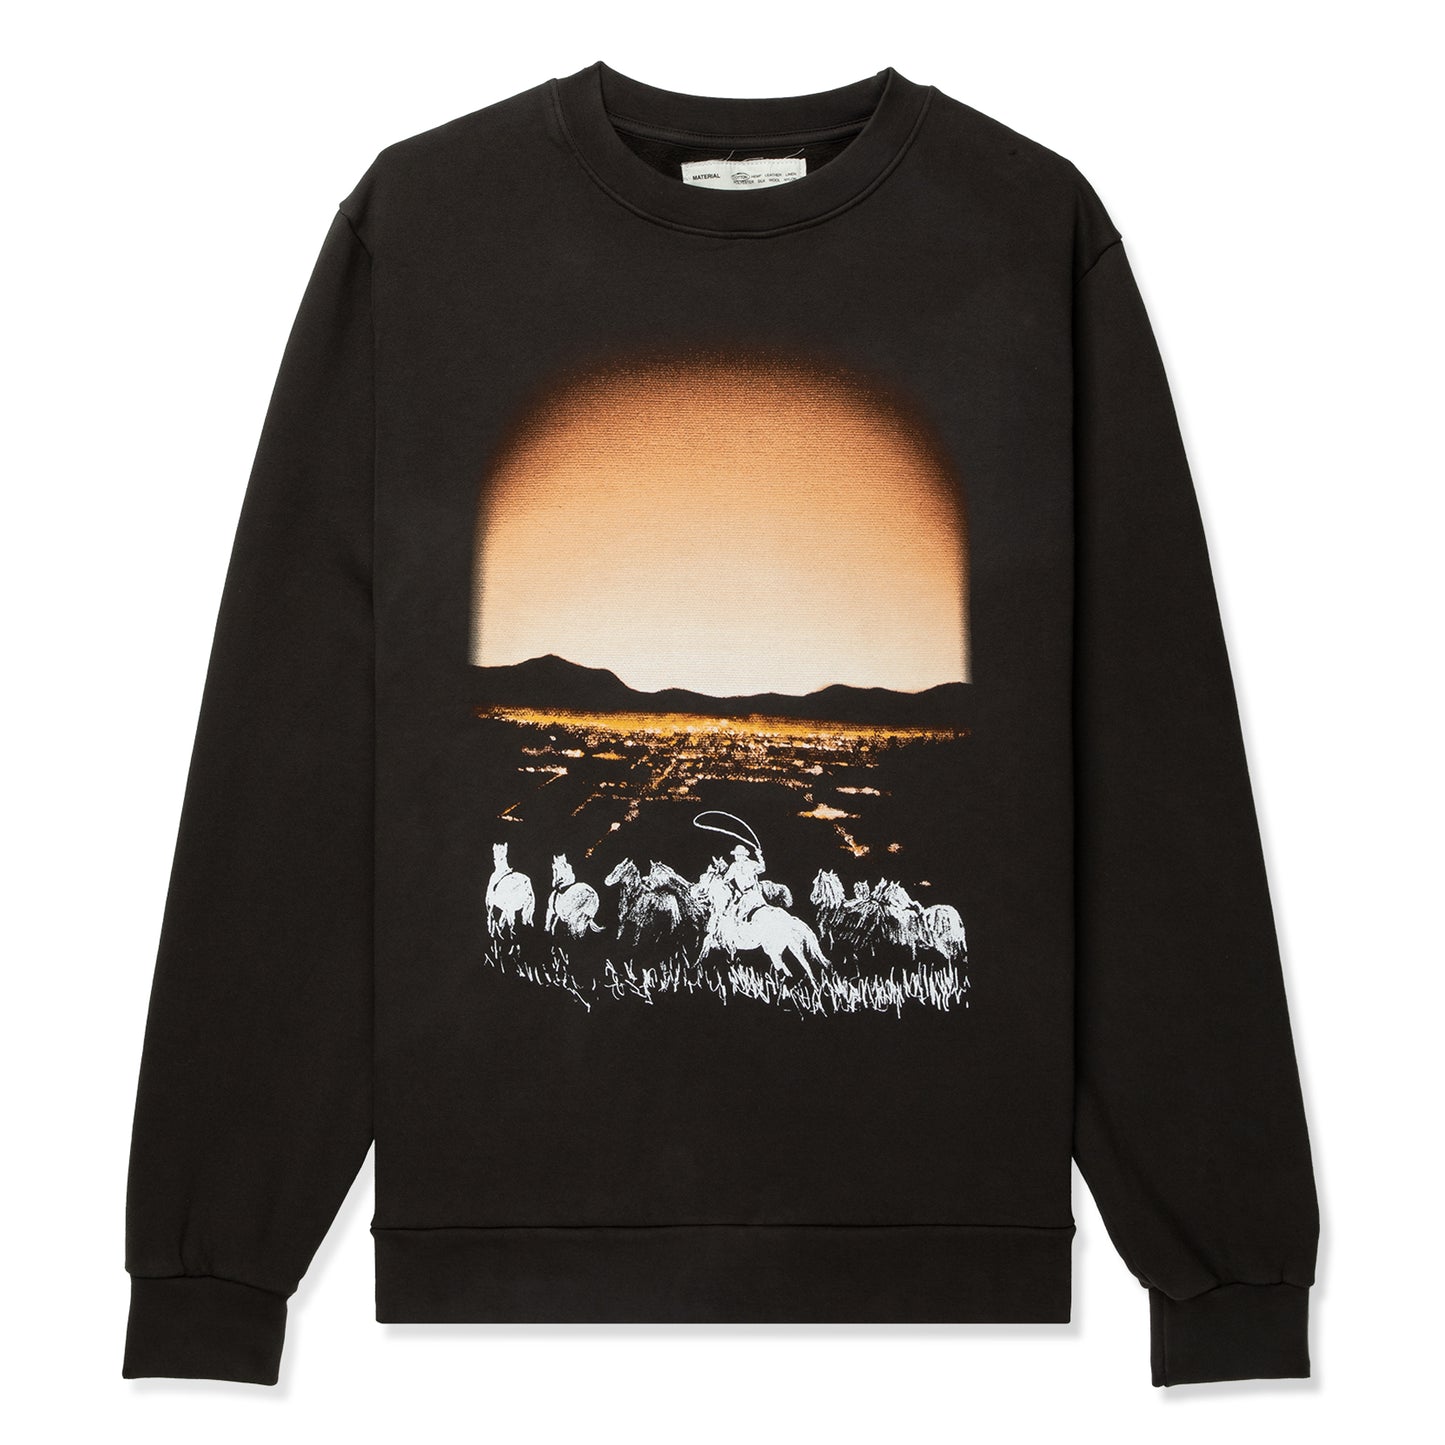 ONE OF THESE DAYS Beyond the Past Crewneck (Black)